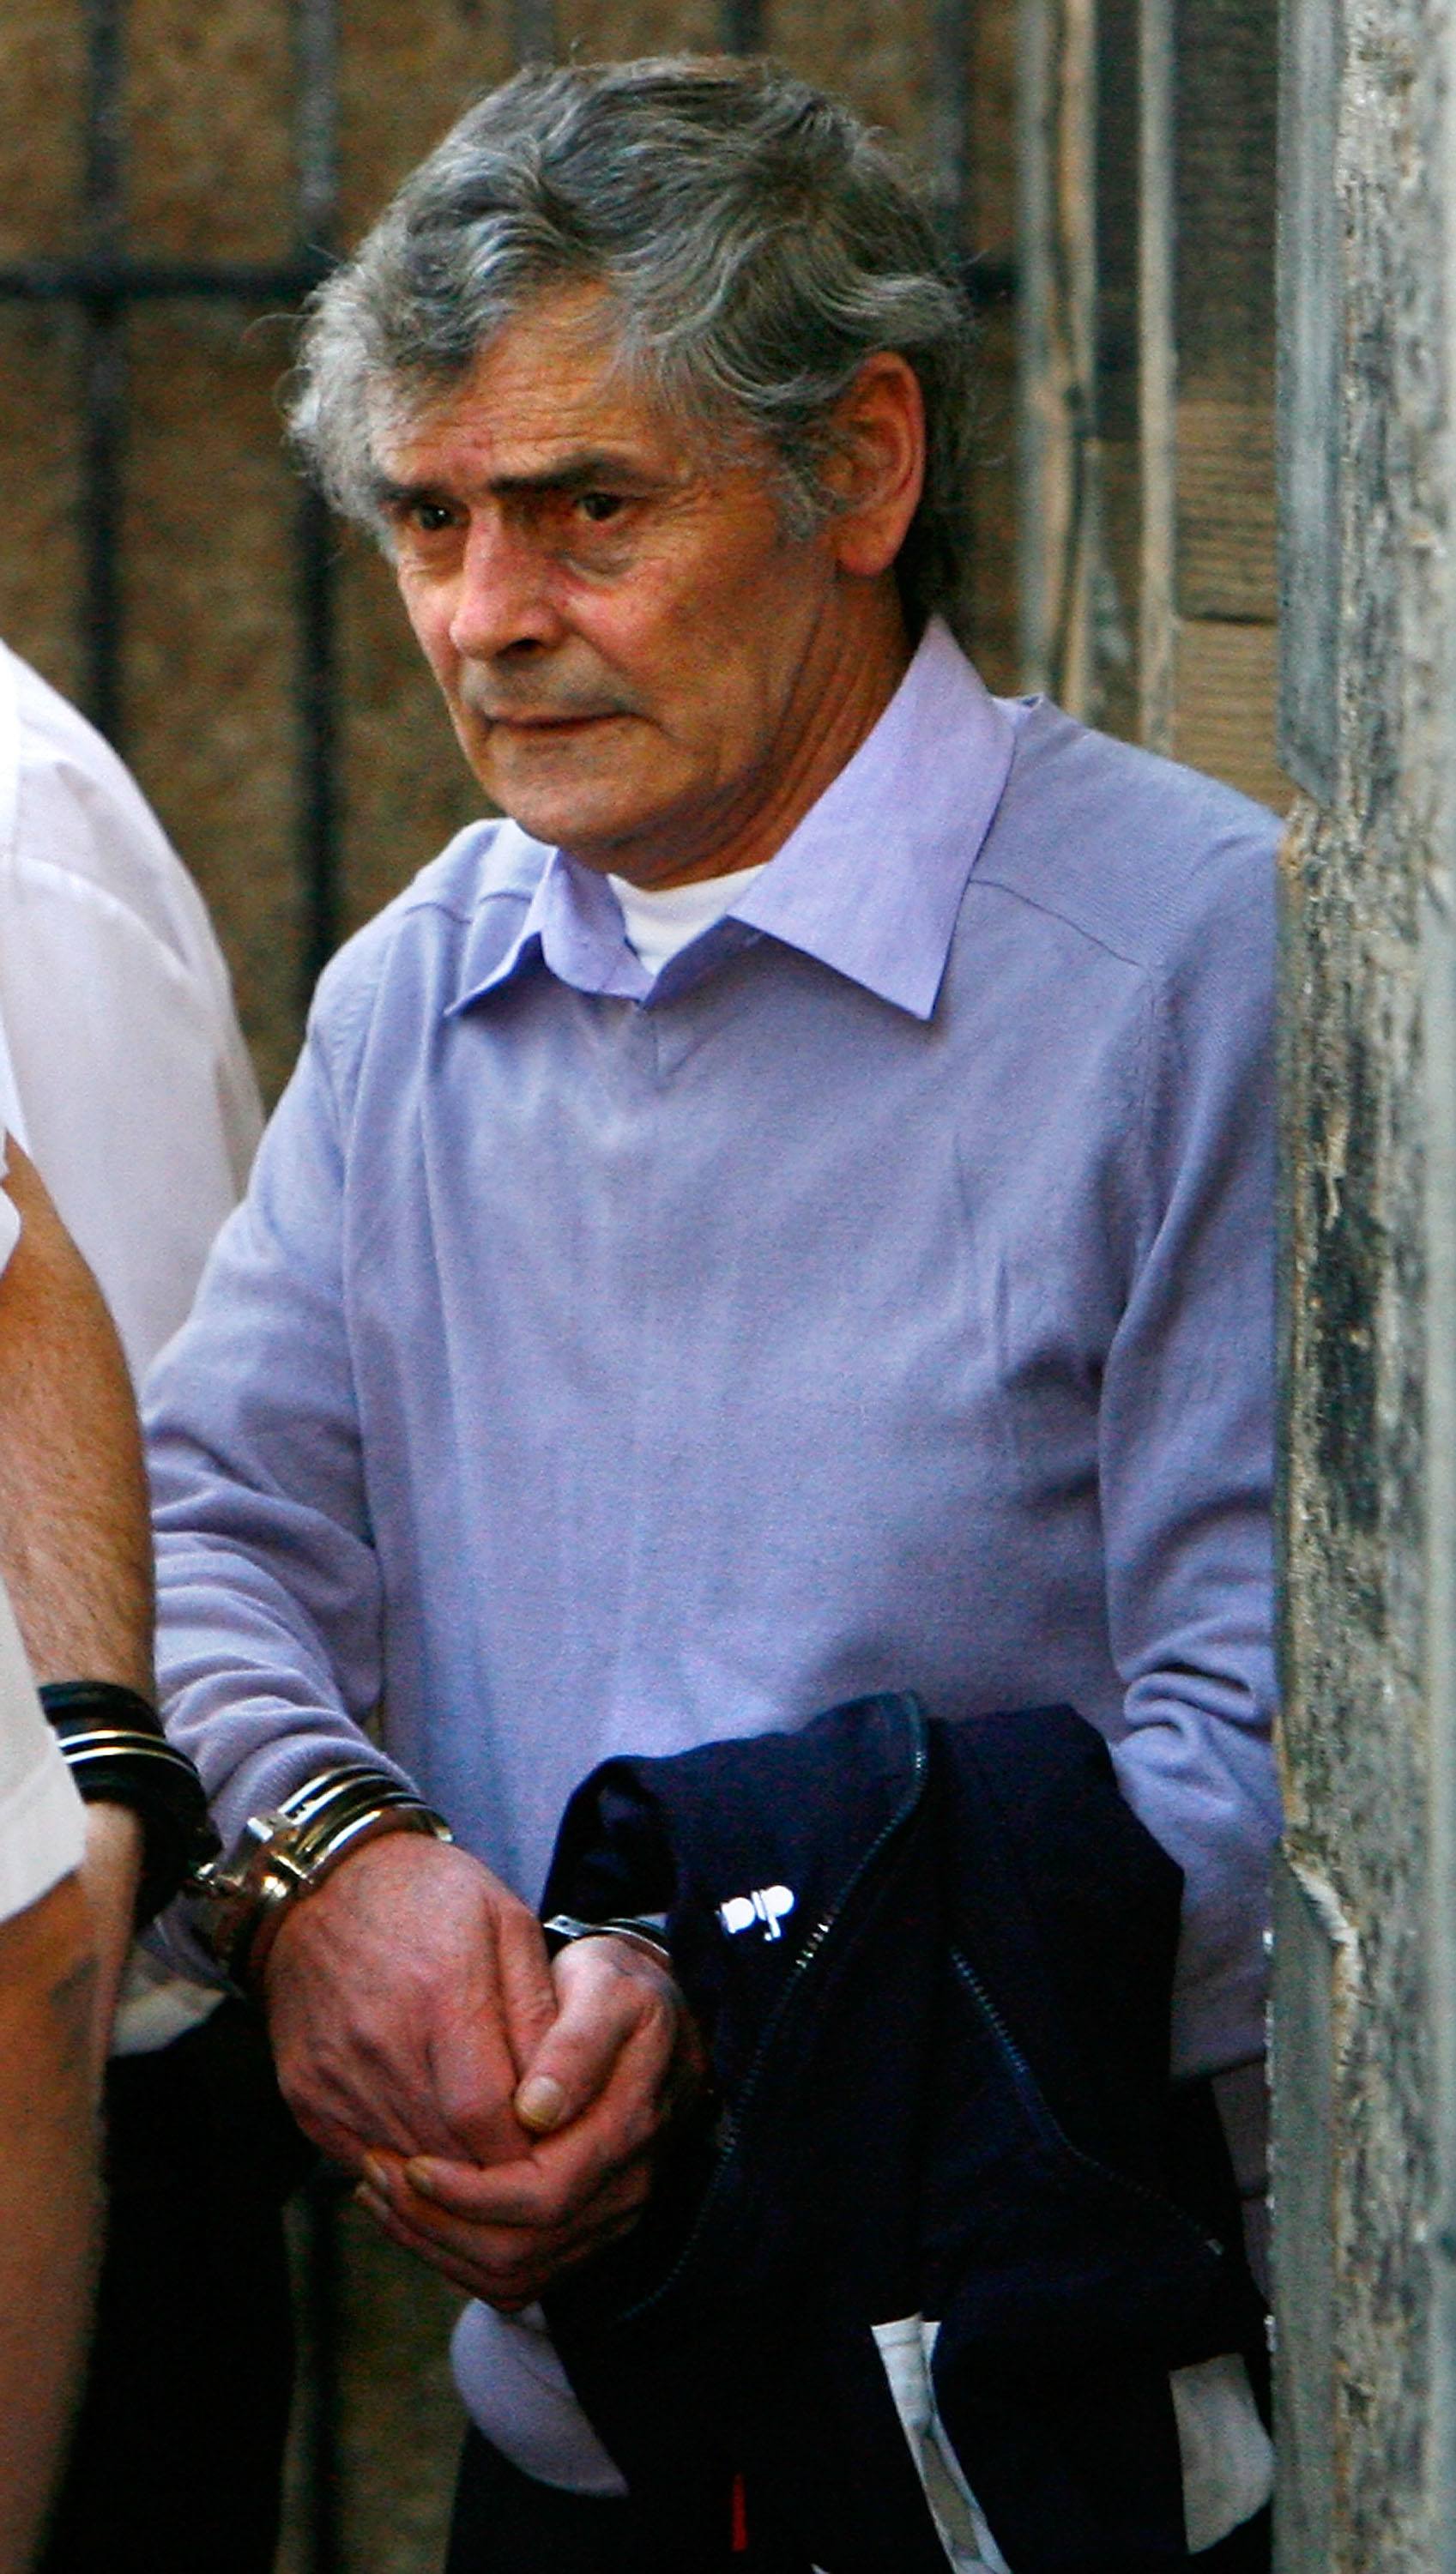 Peter Tobin outside Linlithgow Sheriff Court in 2007 when he was accused of the murder of 15-year-old Vicky Hamilton.